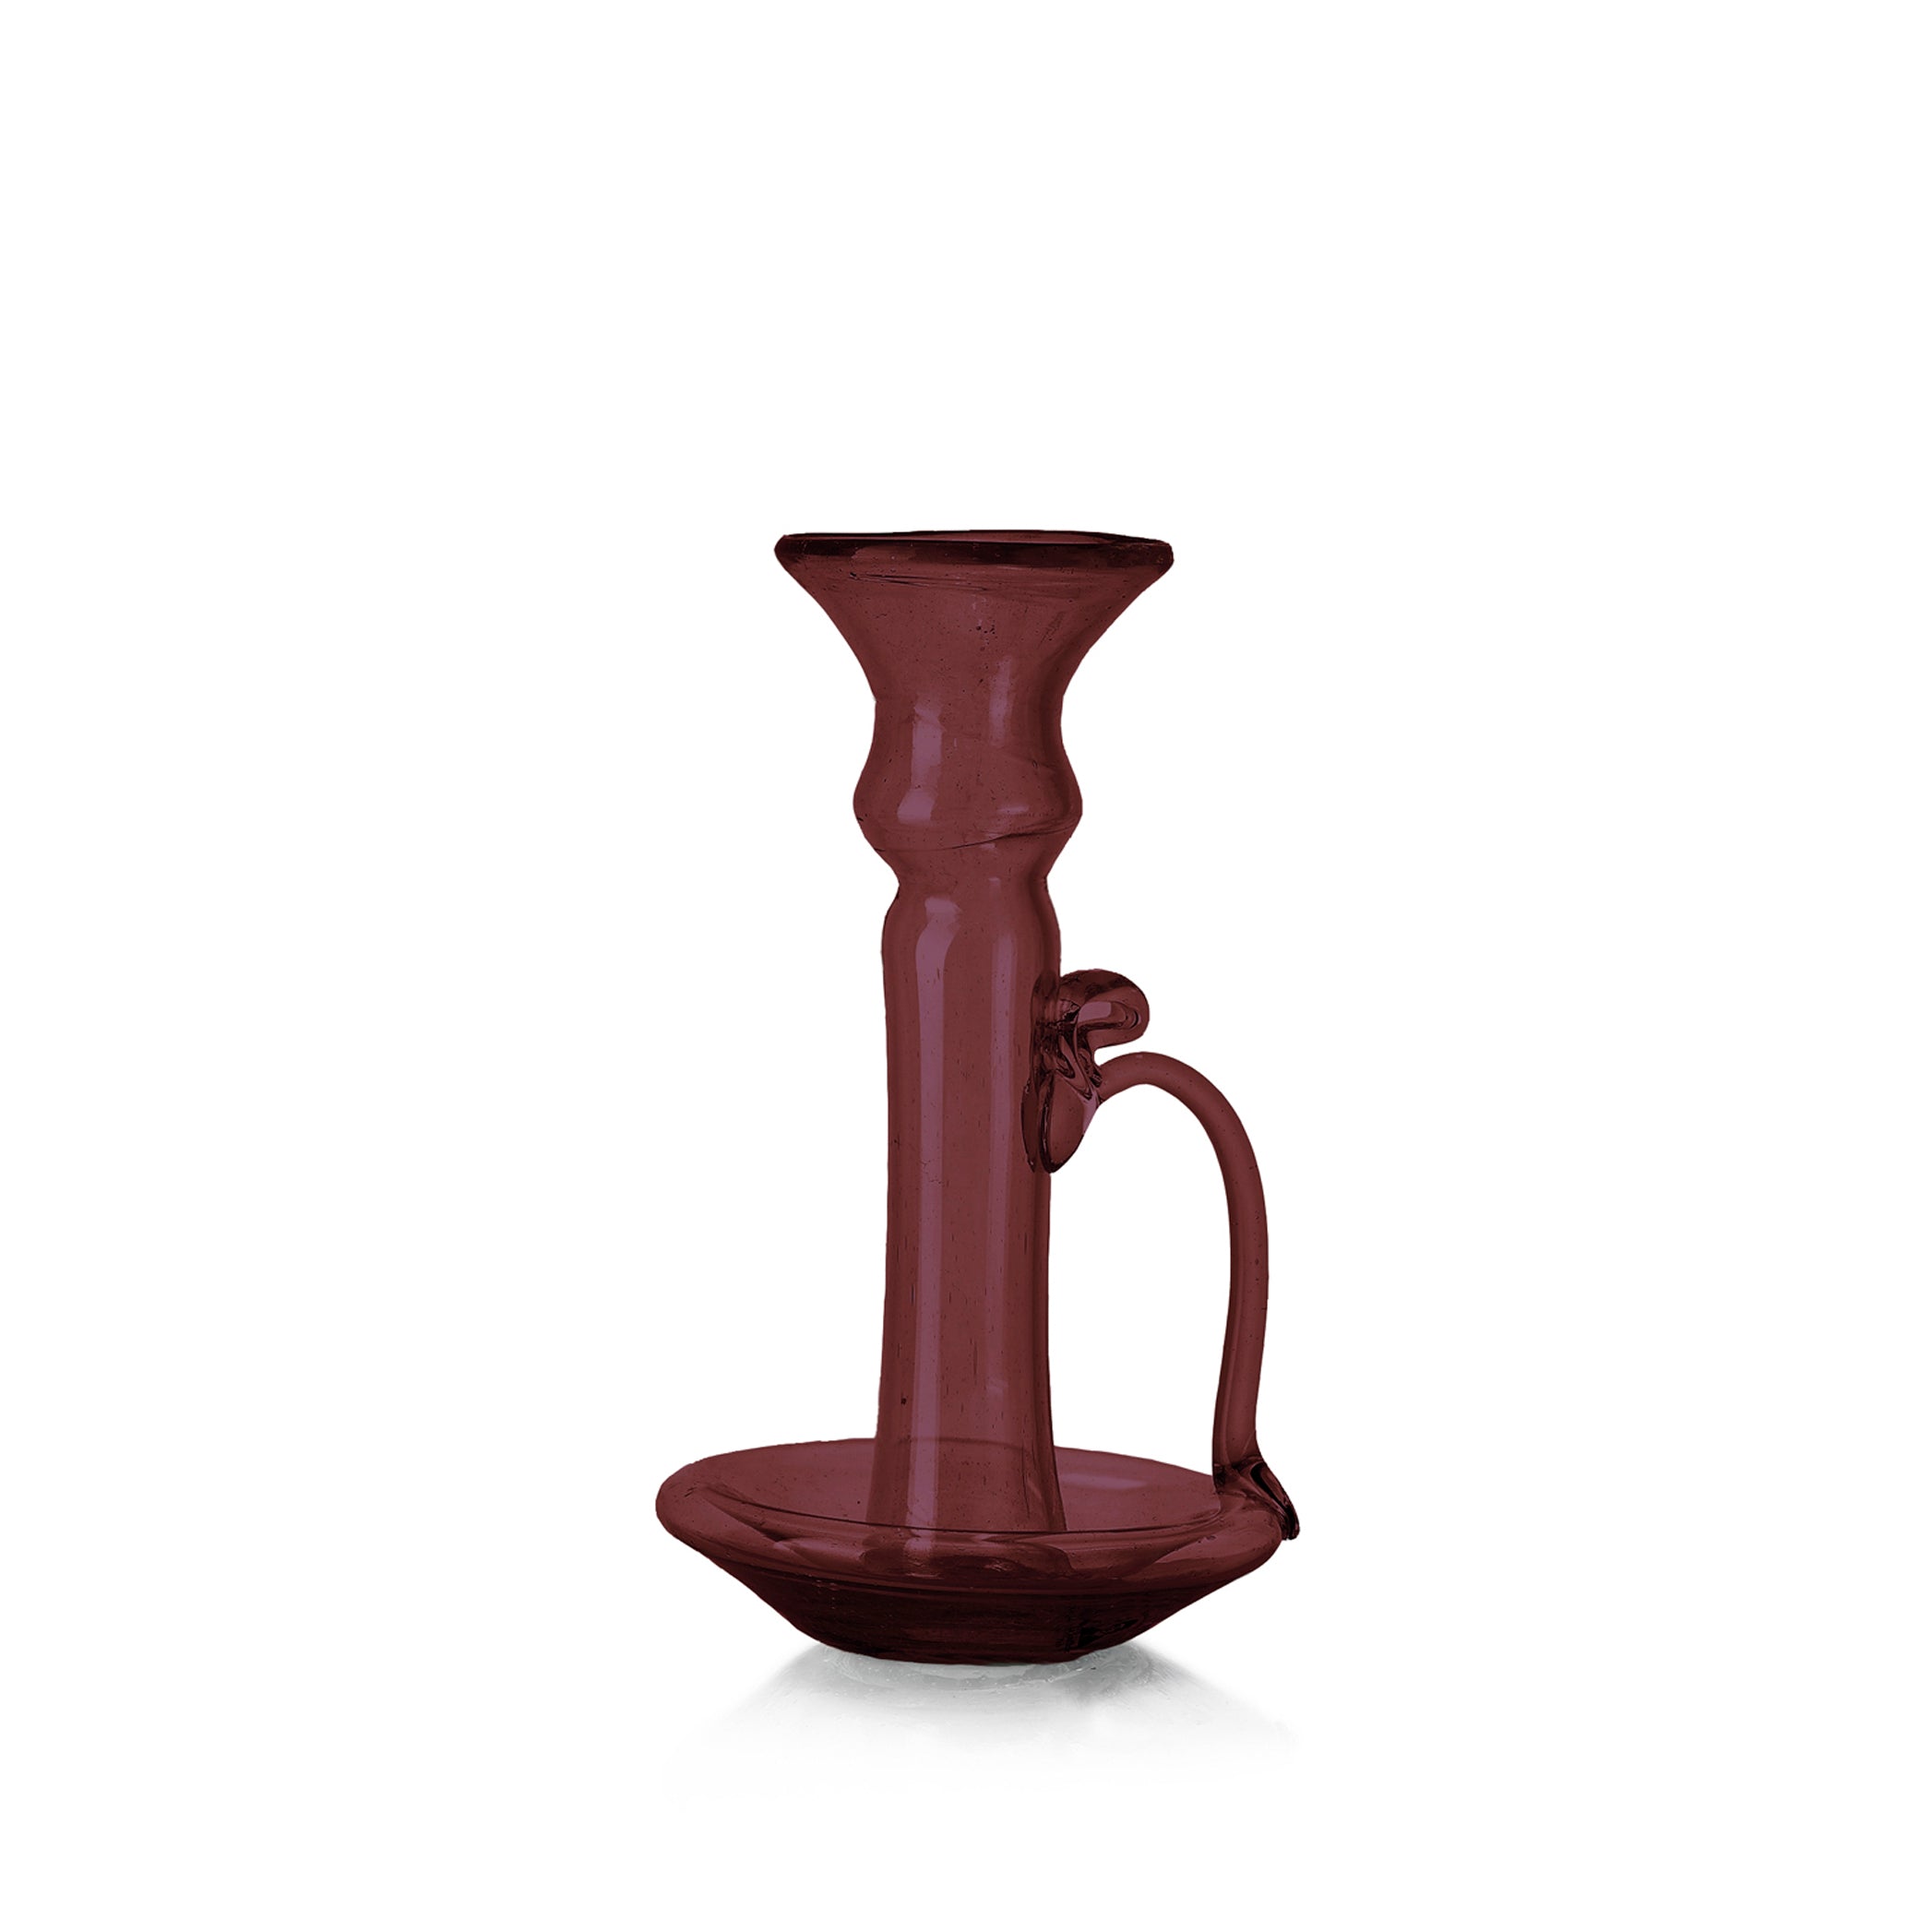 Handblown Glass Candlestick with Handle in Raspberry Red, 20cm